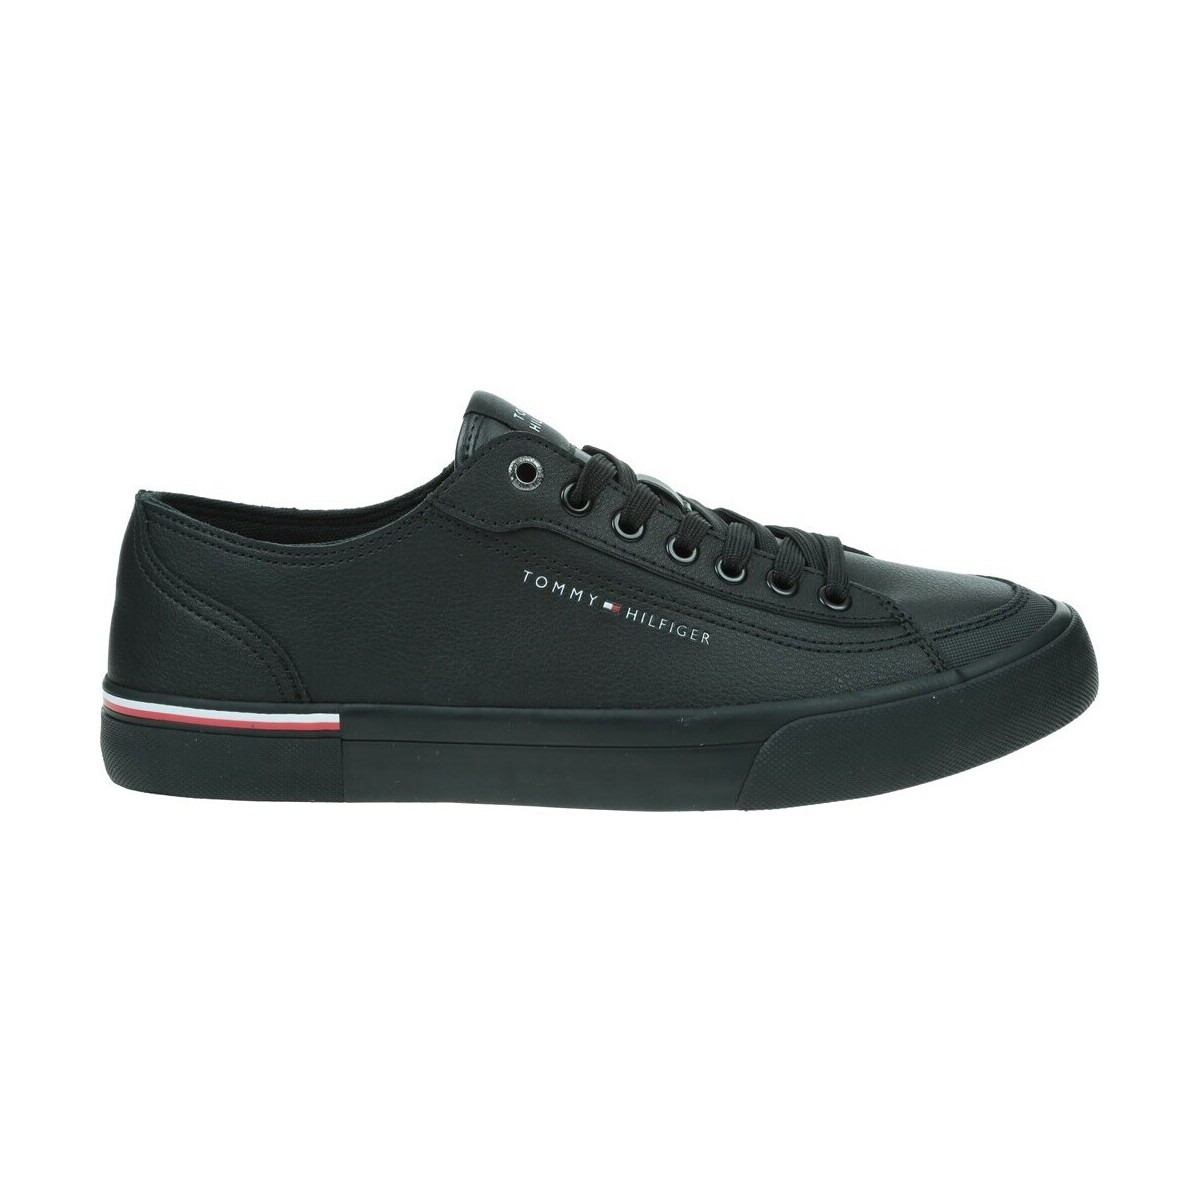 Tommy Hilfiger Corporate Vulc Leather Black